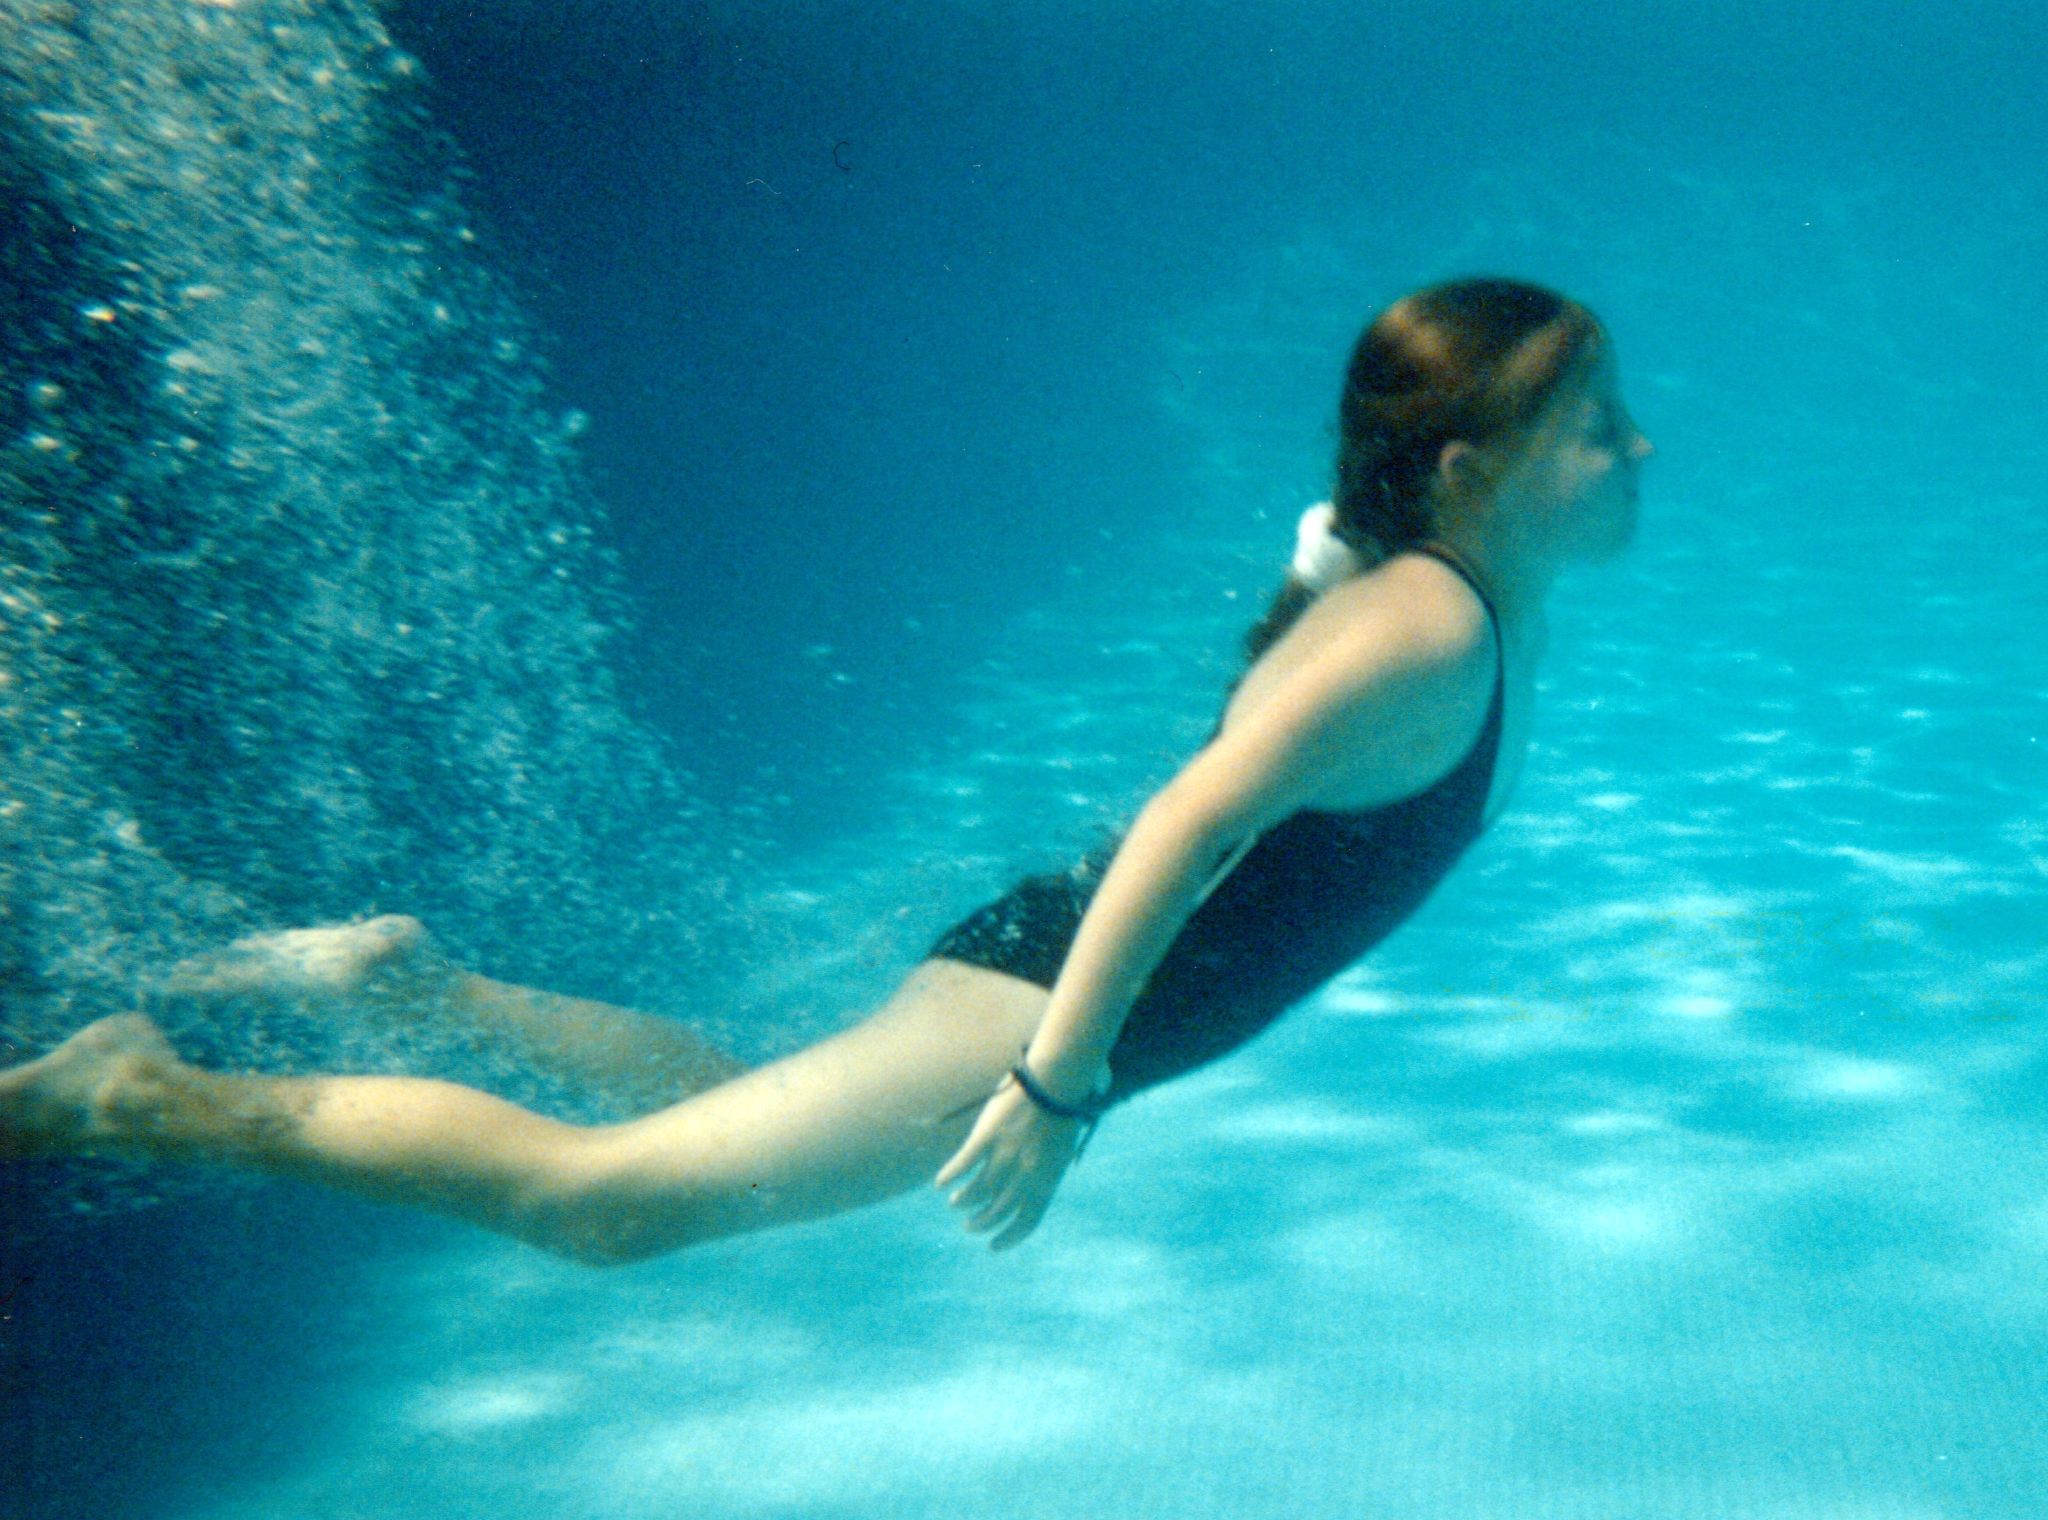 File:A girl in a swimming pool - underwater.jpg - Wikimedia Commons